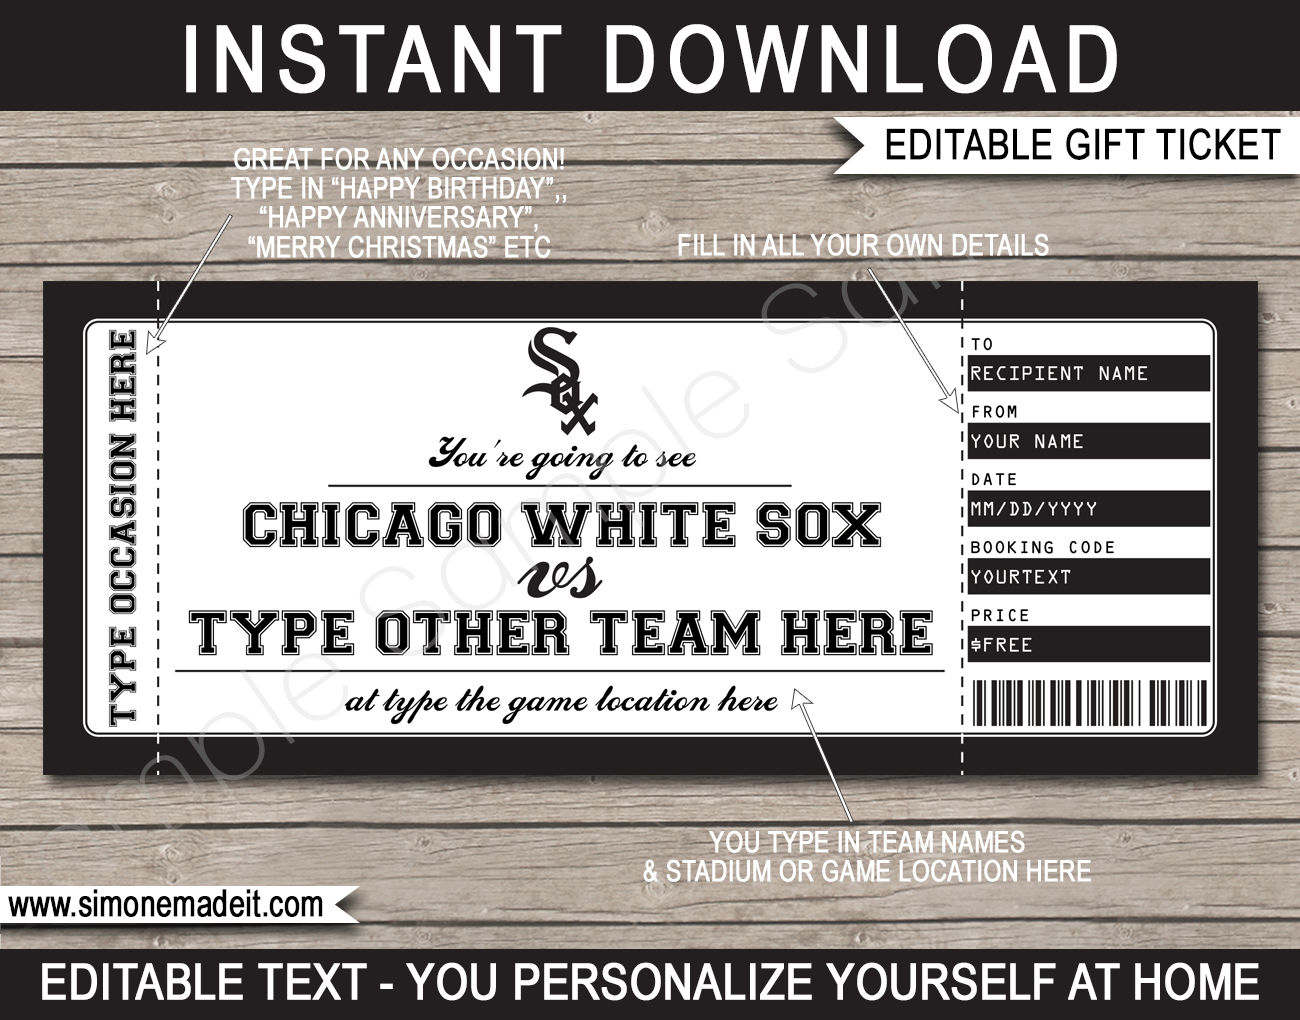 Sale > chicago white sox gifts > in stock